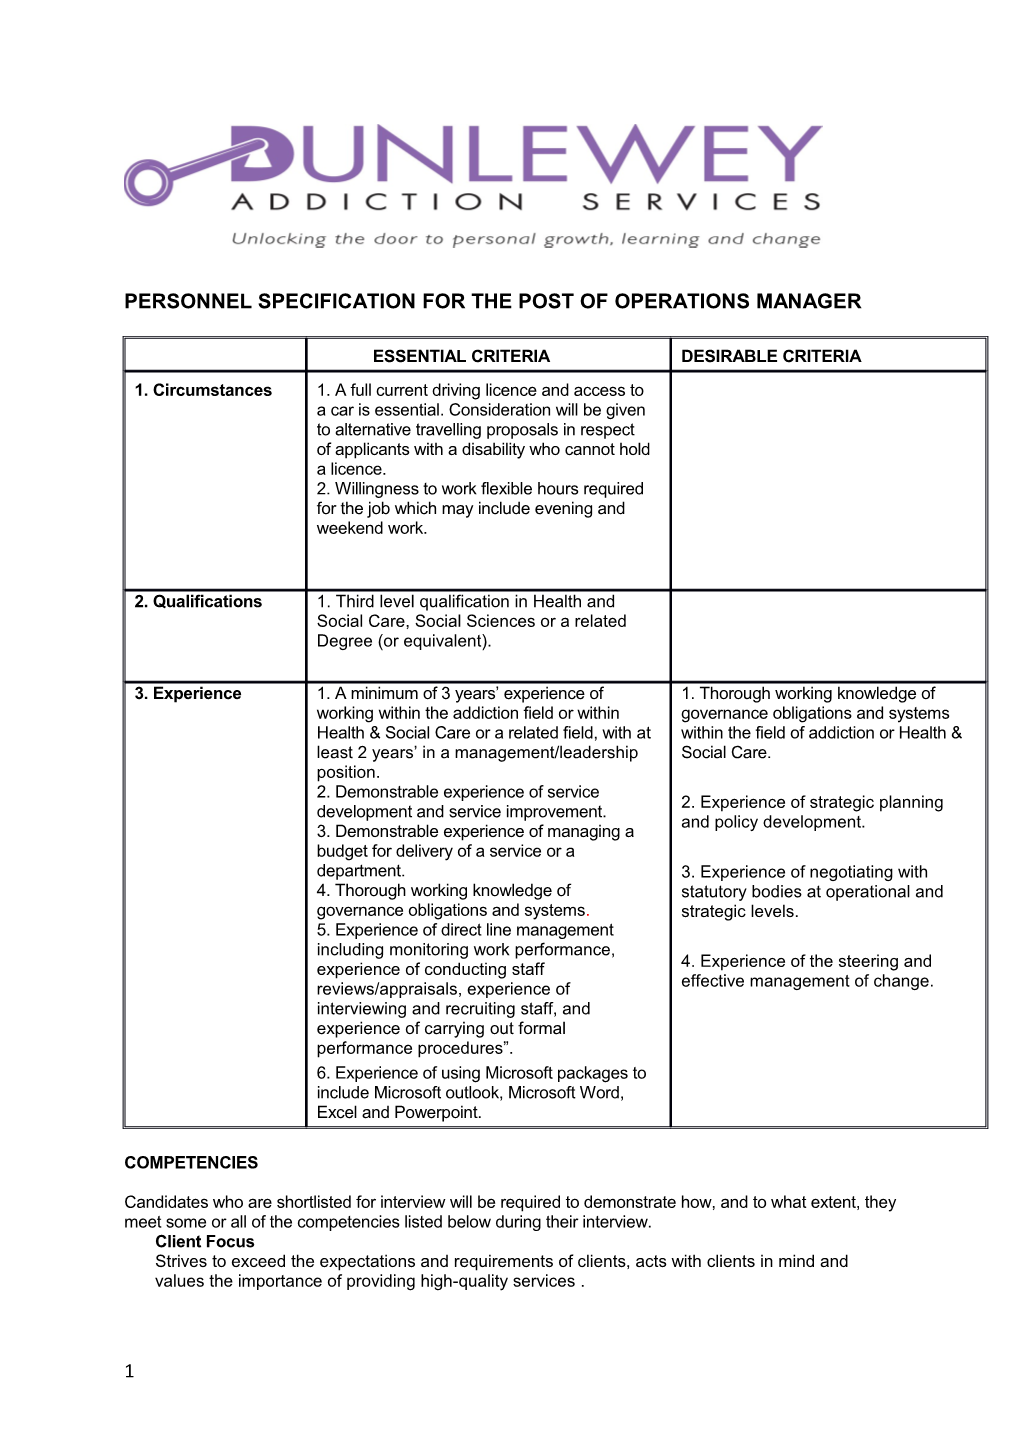 PERSONNEL SPECIFICATION for the POST of Operations Manager